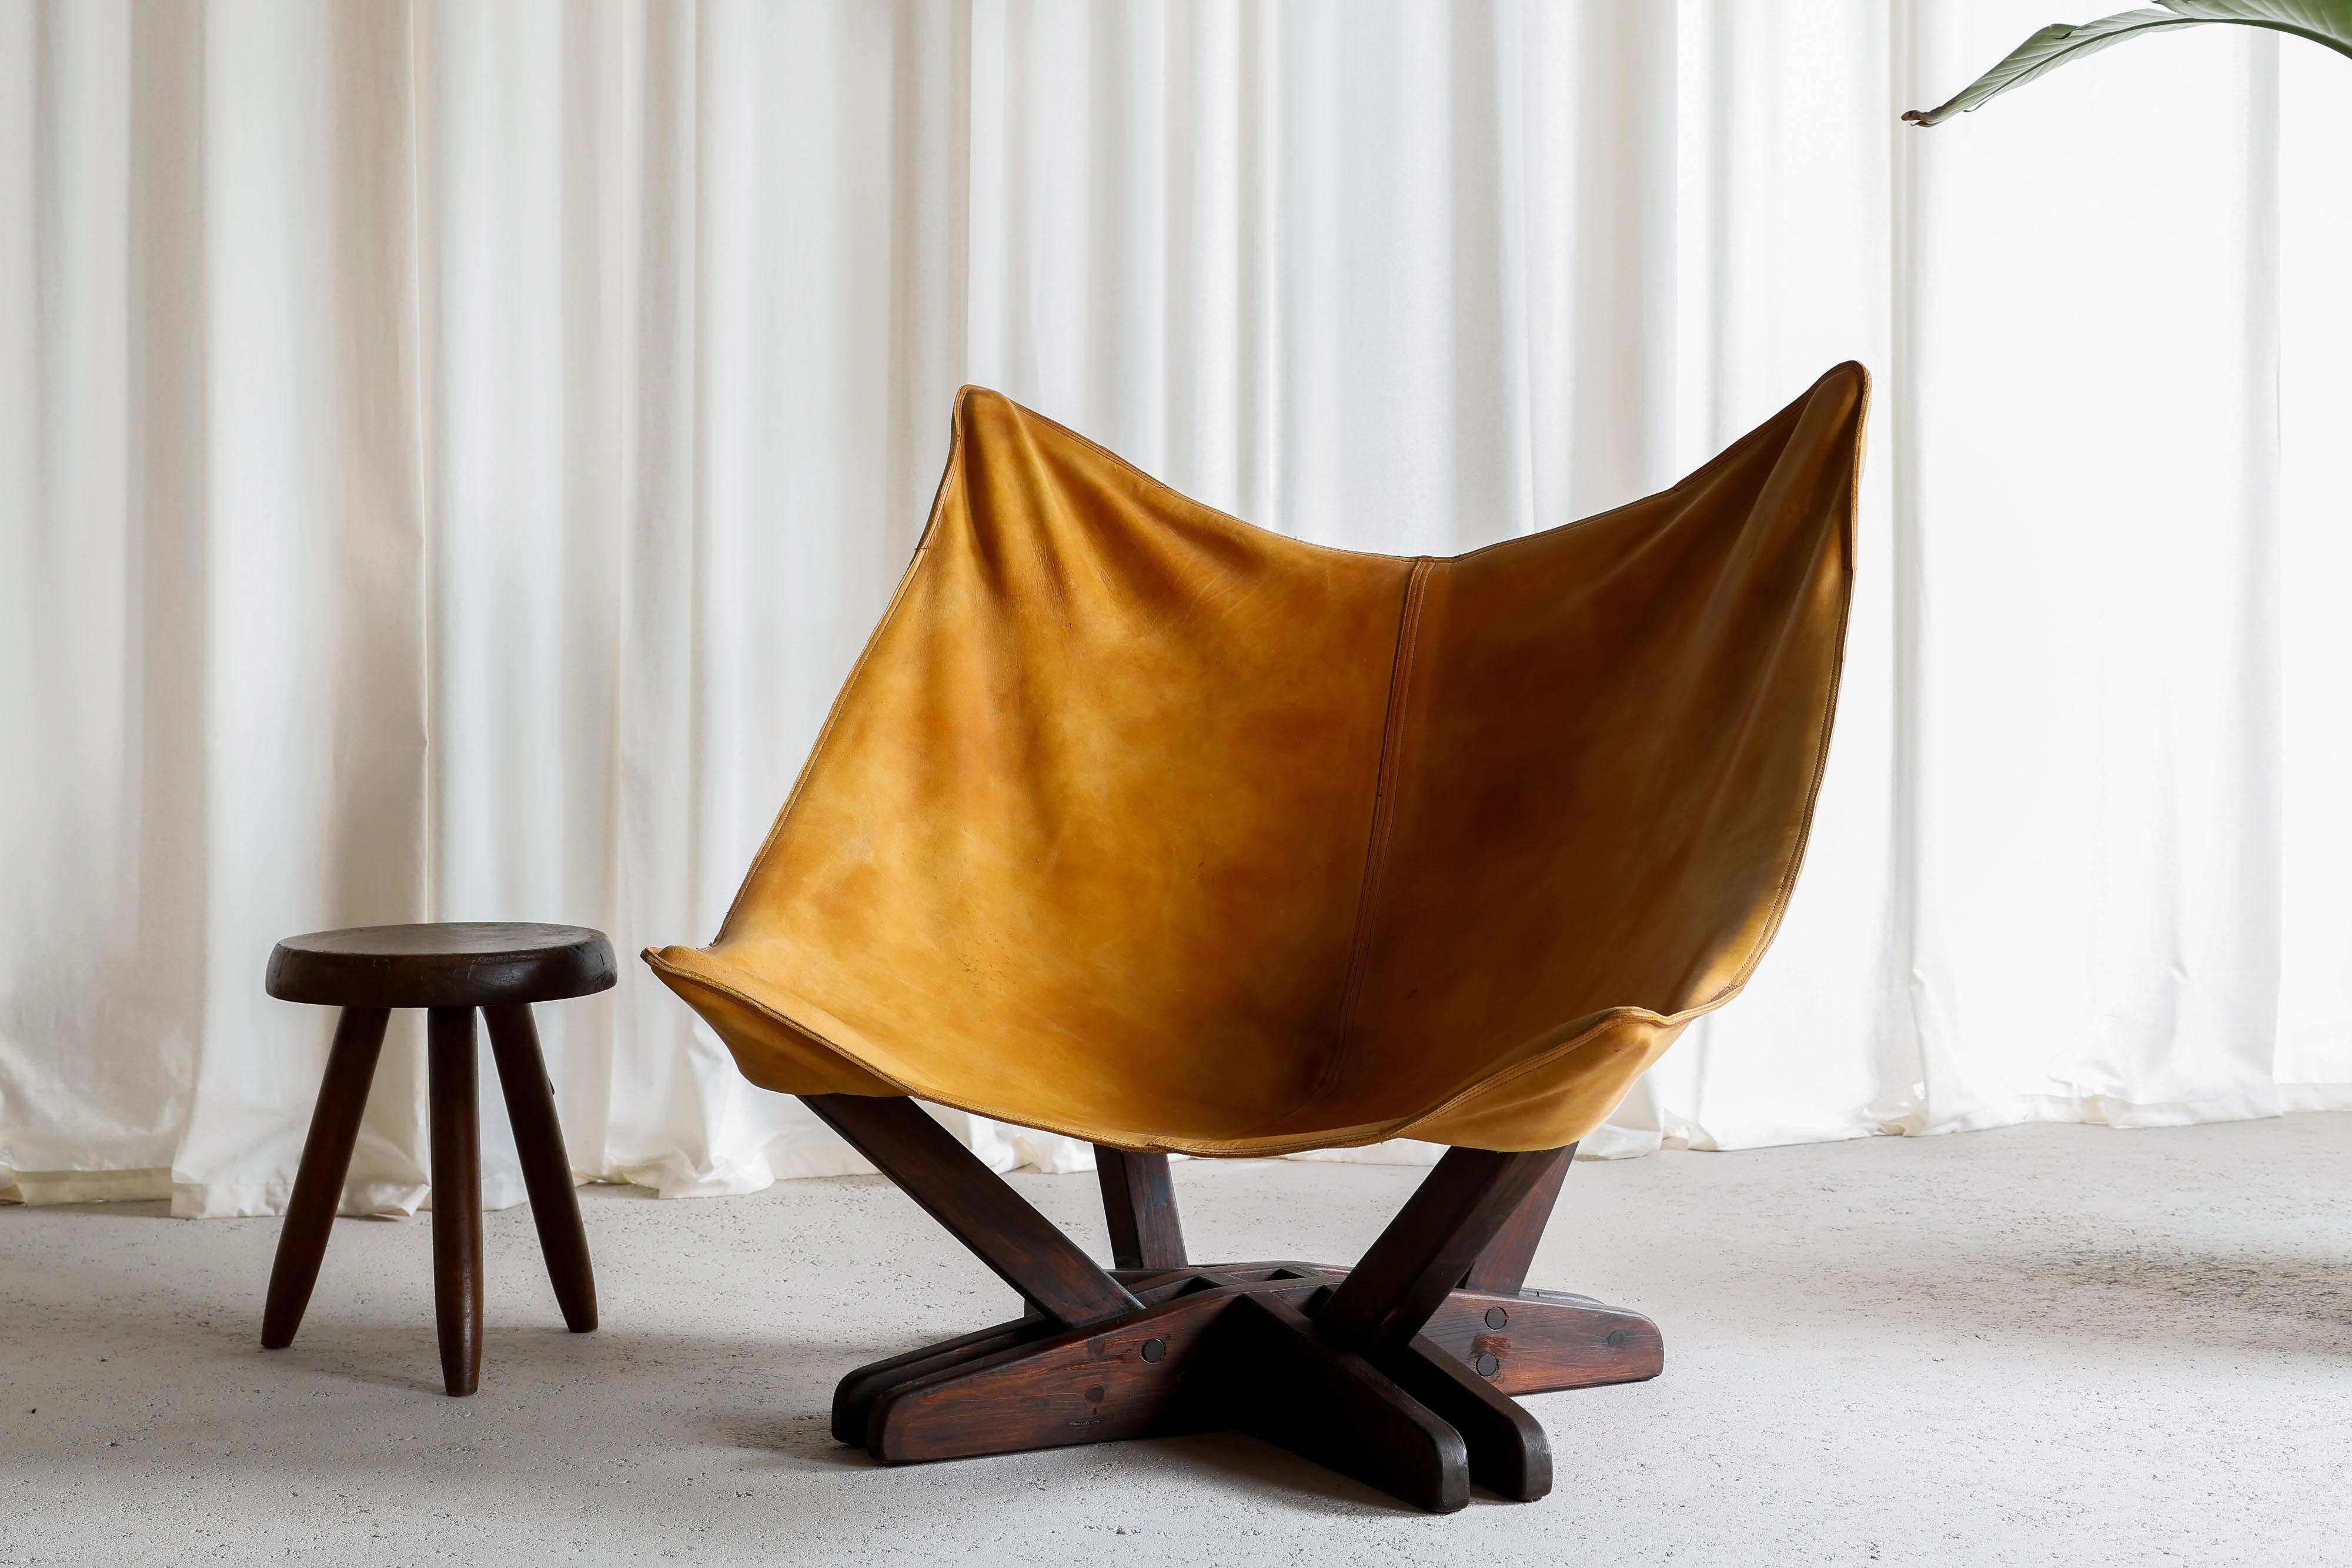 Beautiful Butterfly chair in dark brown stained pine and leather made in Sweden in 1960. Though we may not know the designer, the chair's top-notch quality speaks for itself. It's a blend of sturdy pine and smooth leather, giving it a unique